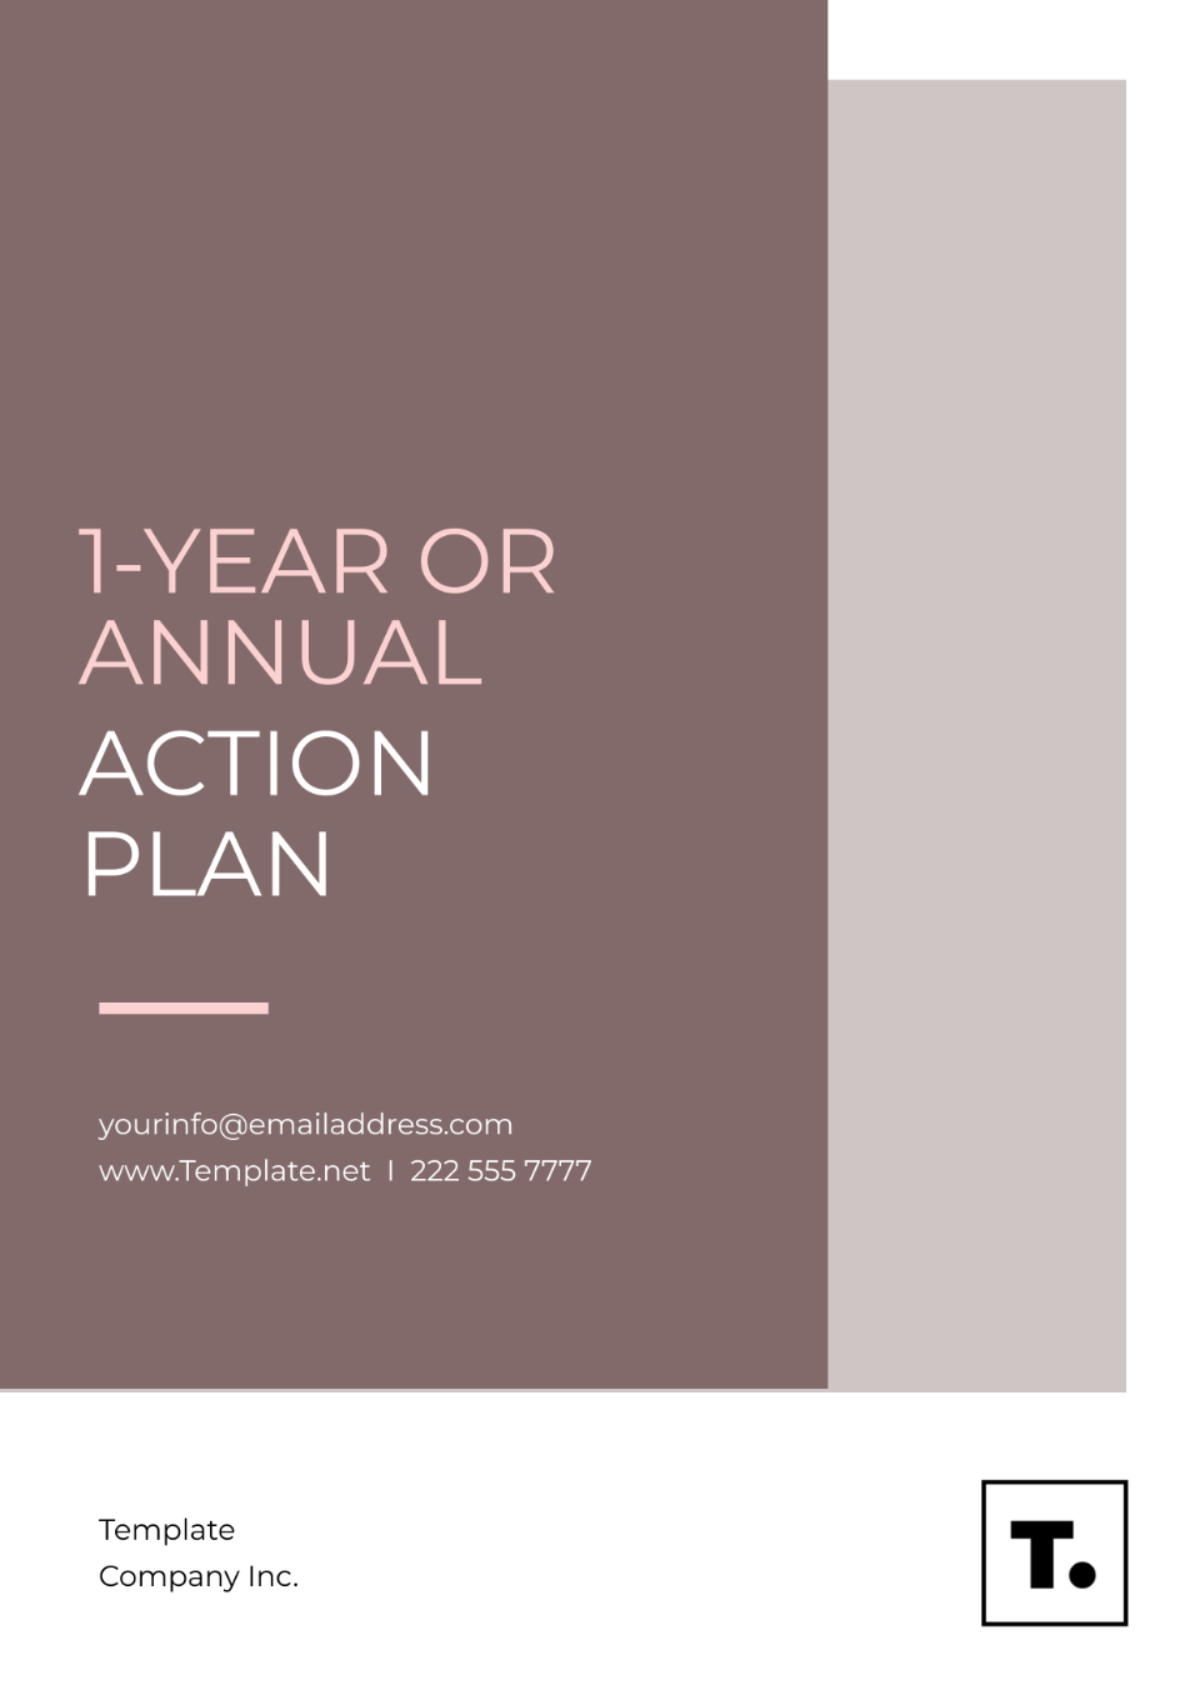 Free 1-Year Or Annual Action Plan Template